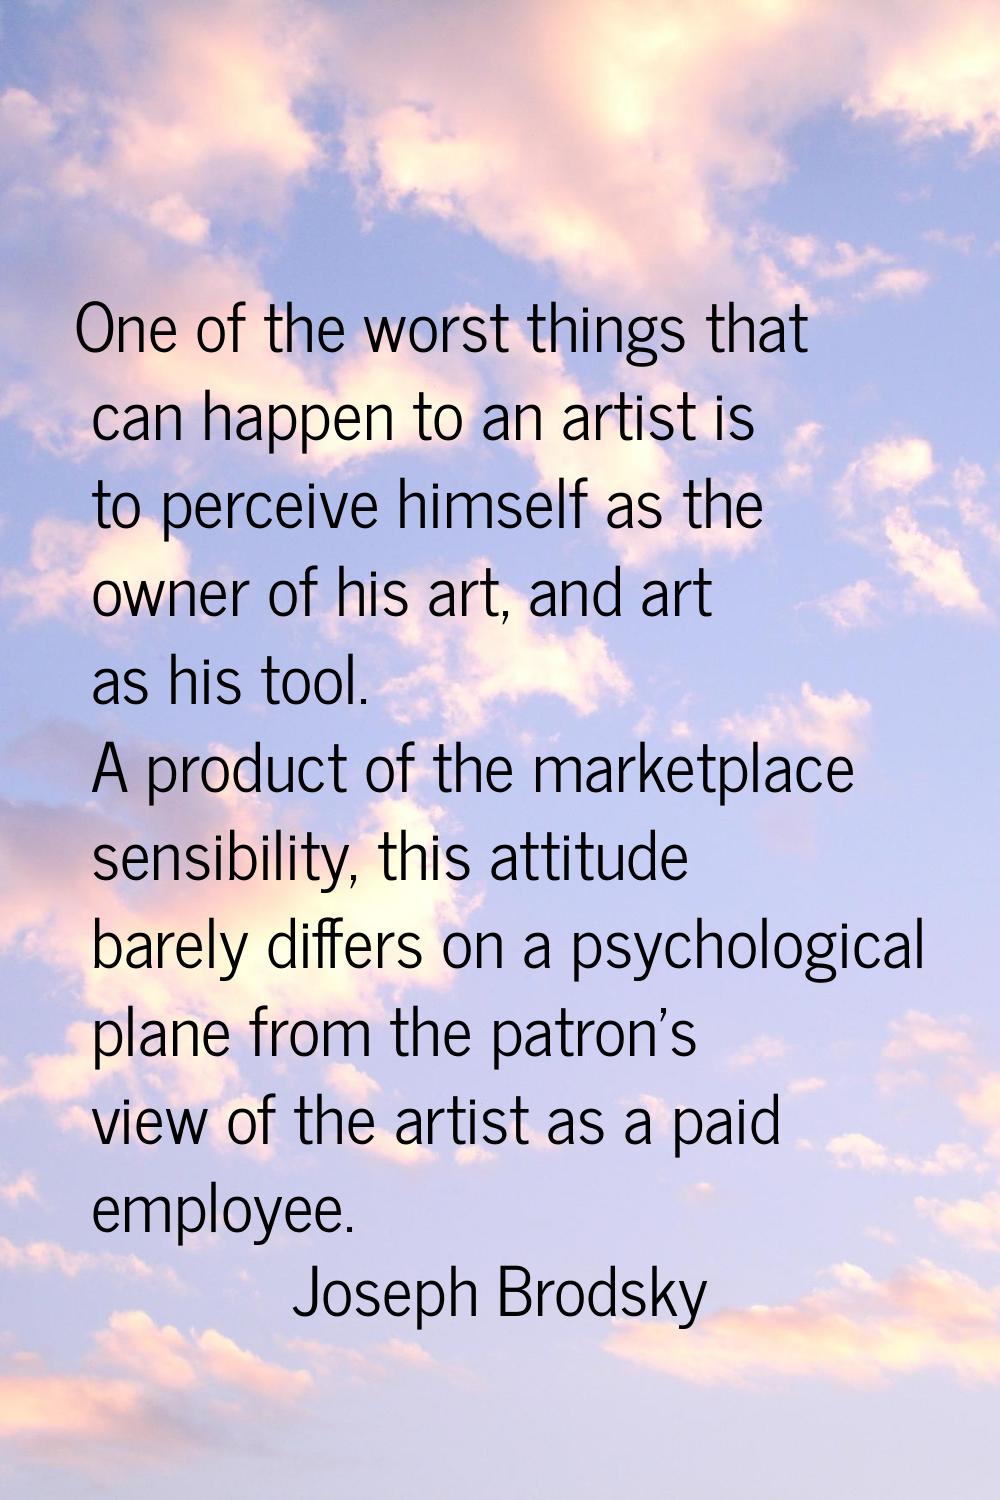 One of the worst things that can happen to an artist is to perceive himself as the owner of his art